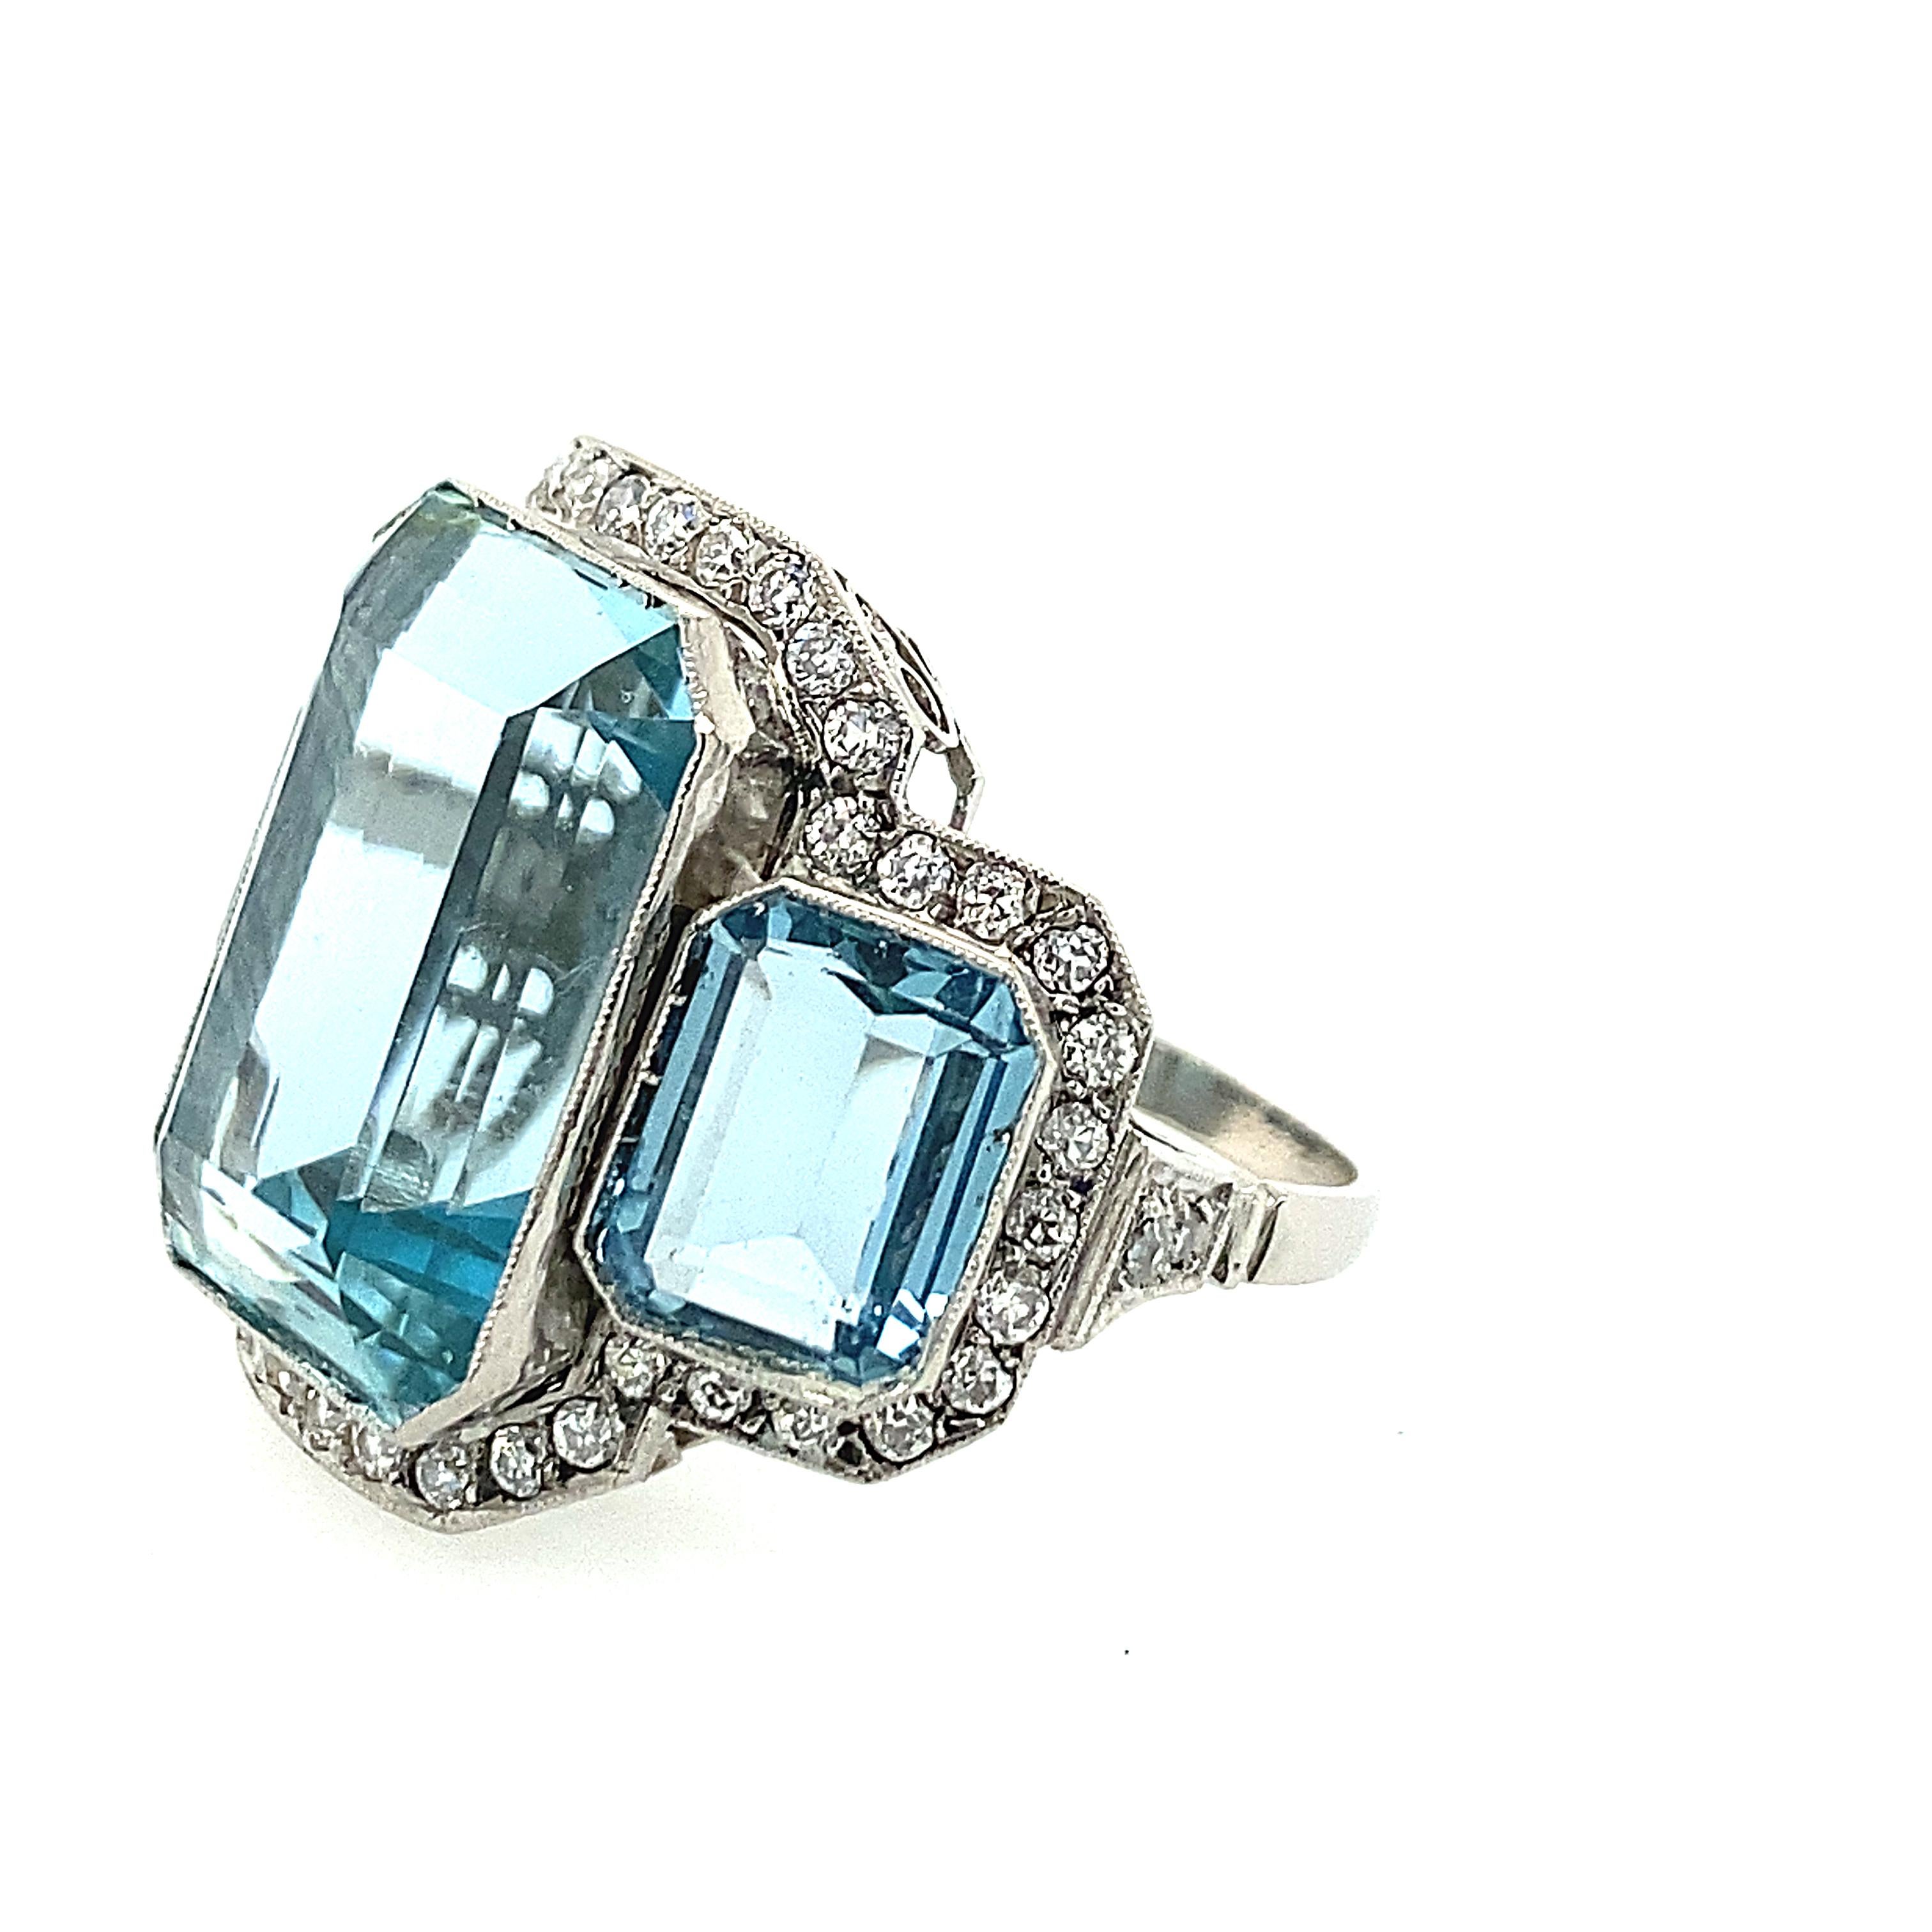 Aquamarine and Diamond Ring with three aquamarine stones that weigh 17.60carats. Art Deco Style in platinum. Approximately 1.20carats of white diamonds.